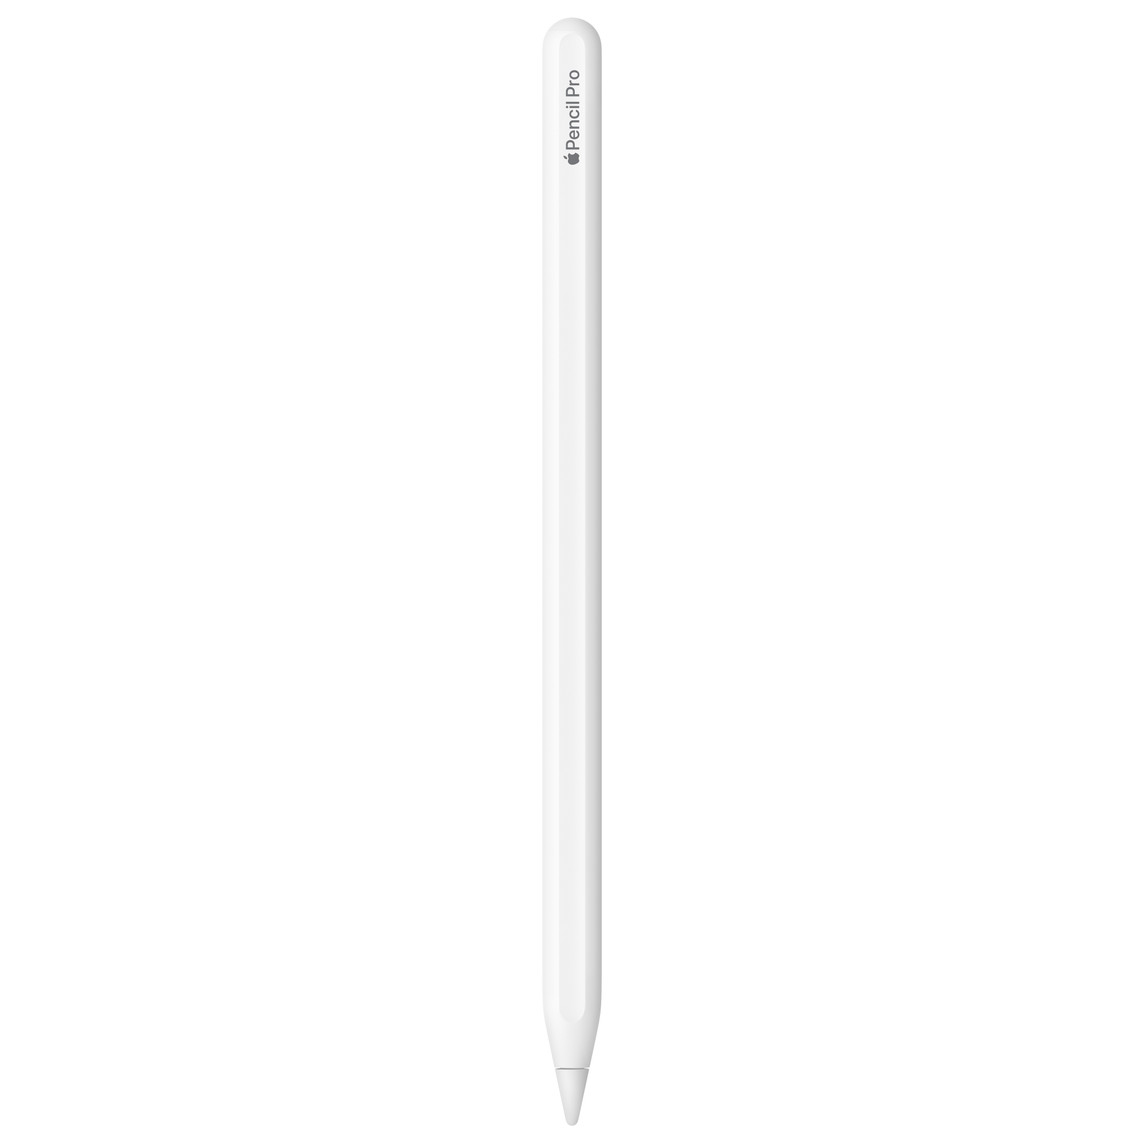 Apple Pencil Pro, White, engraving reads, Apple Pencil Pro, the word Apple represented by an Apple logo